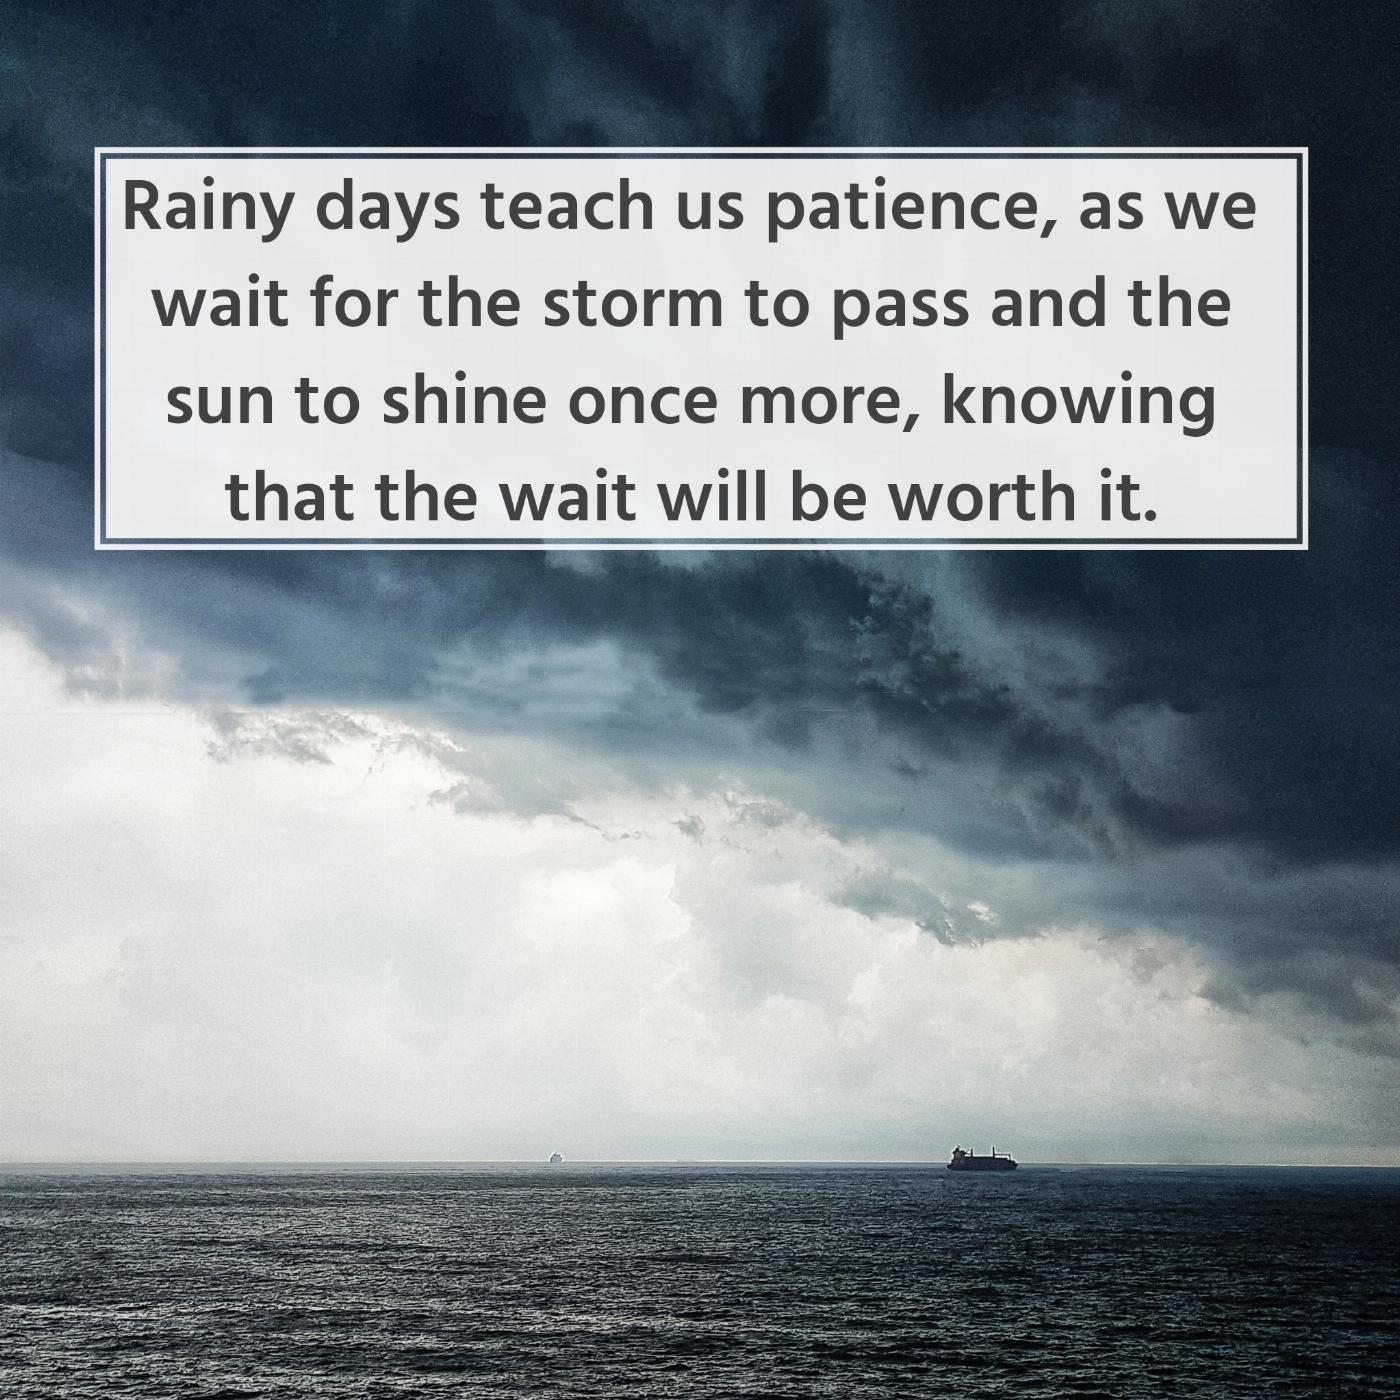 Rainy days teach us patience as we wait for the storm to pass